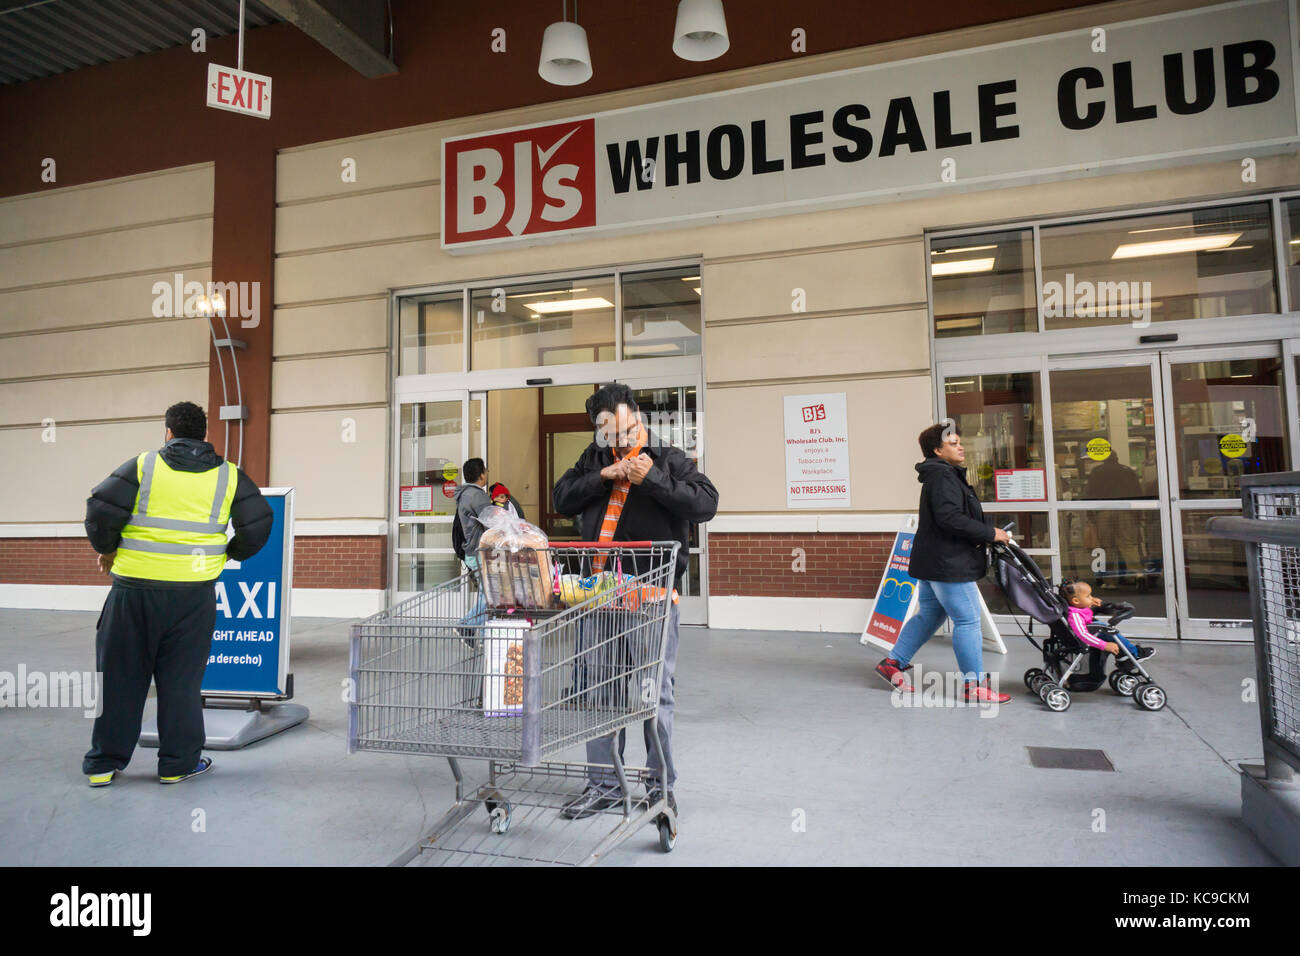 Shoppers at a BJ's Wholesale Club in a mall in the Bronx in New York on Saturday, September 30, 2017. CVC Capital Partners and Leonard Green & Partners, the owners of the buying club, are reported to be putting BJ's Wholesale Club on the block hoping to attract a buyer at $4 to 4.5 billion. (© Richard B. Levine) Stock Photo